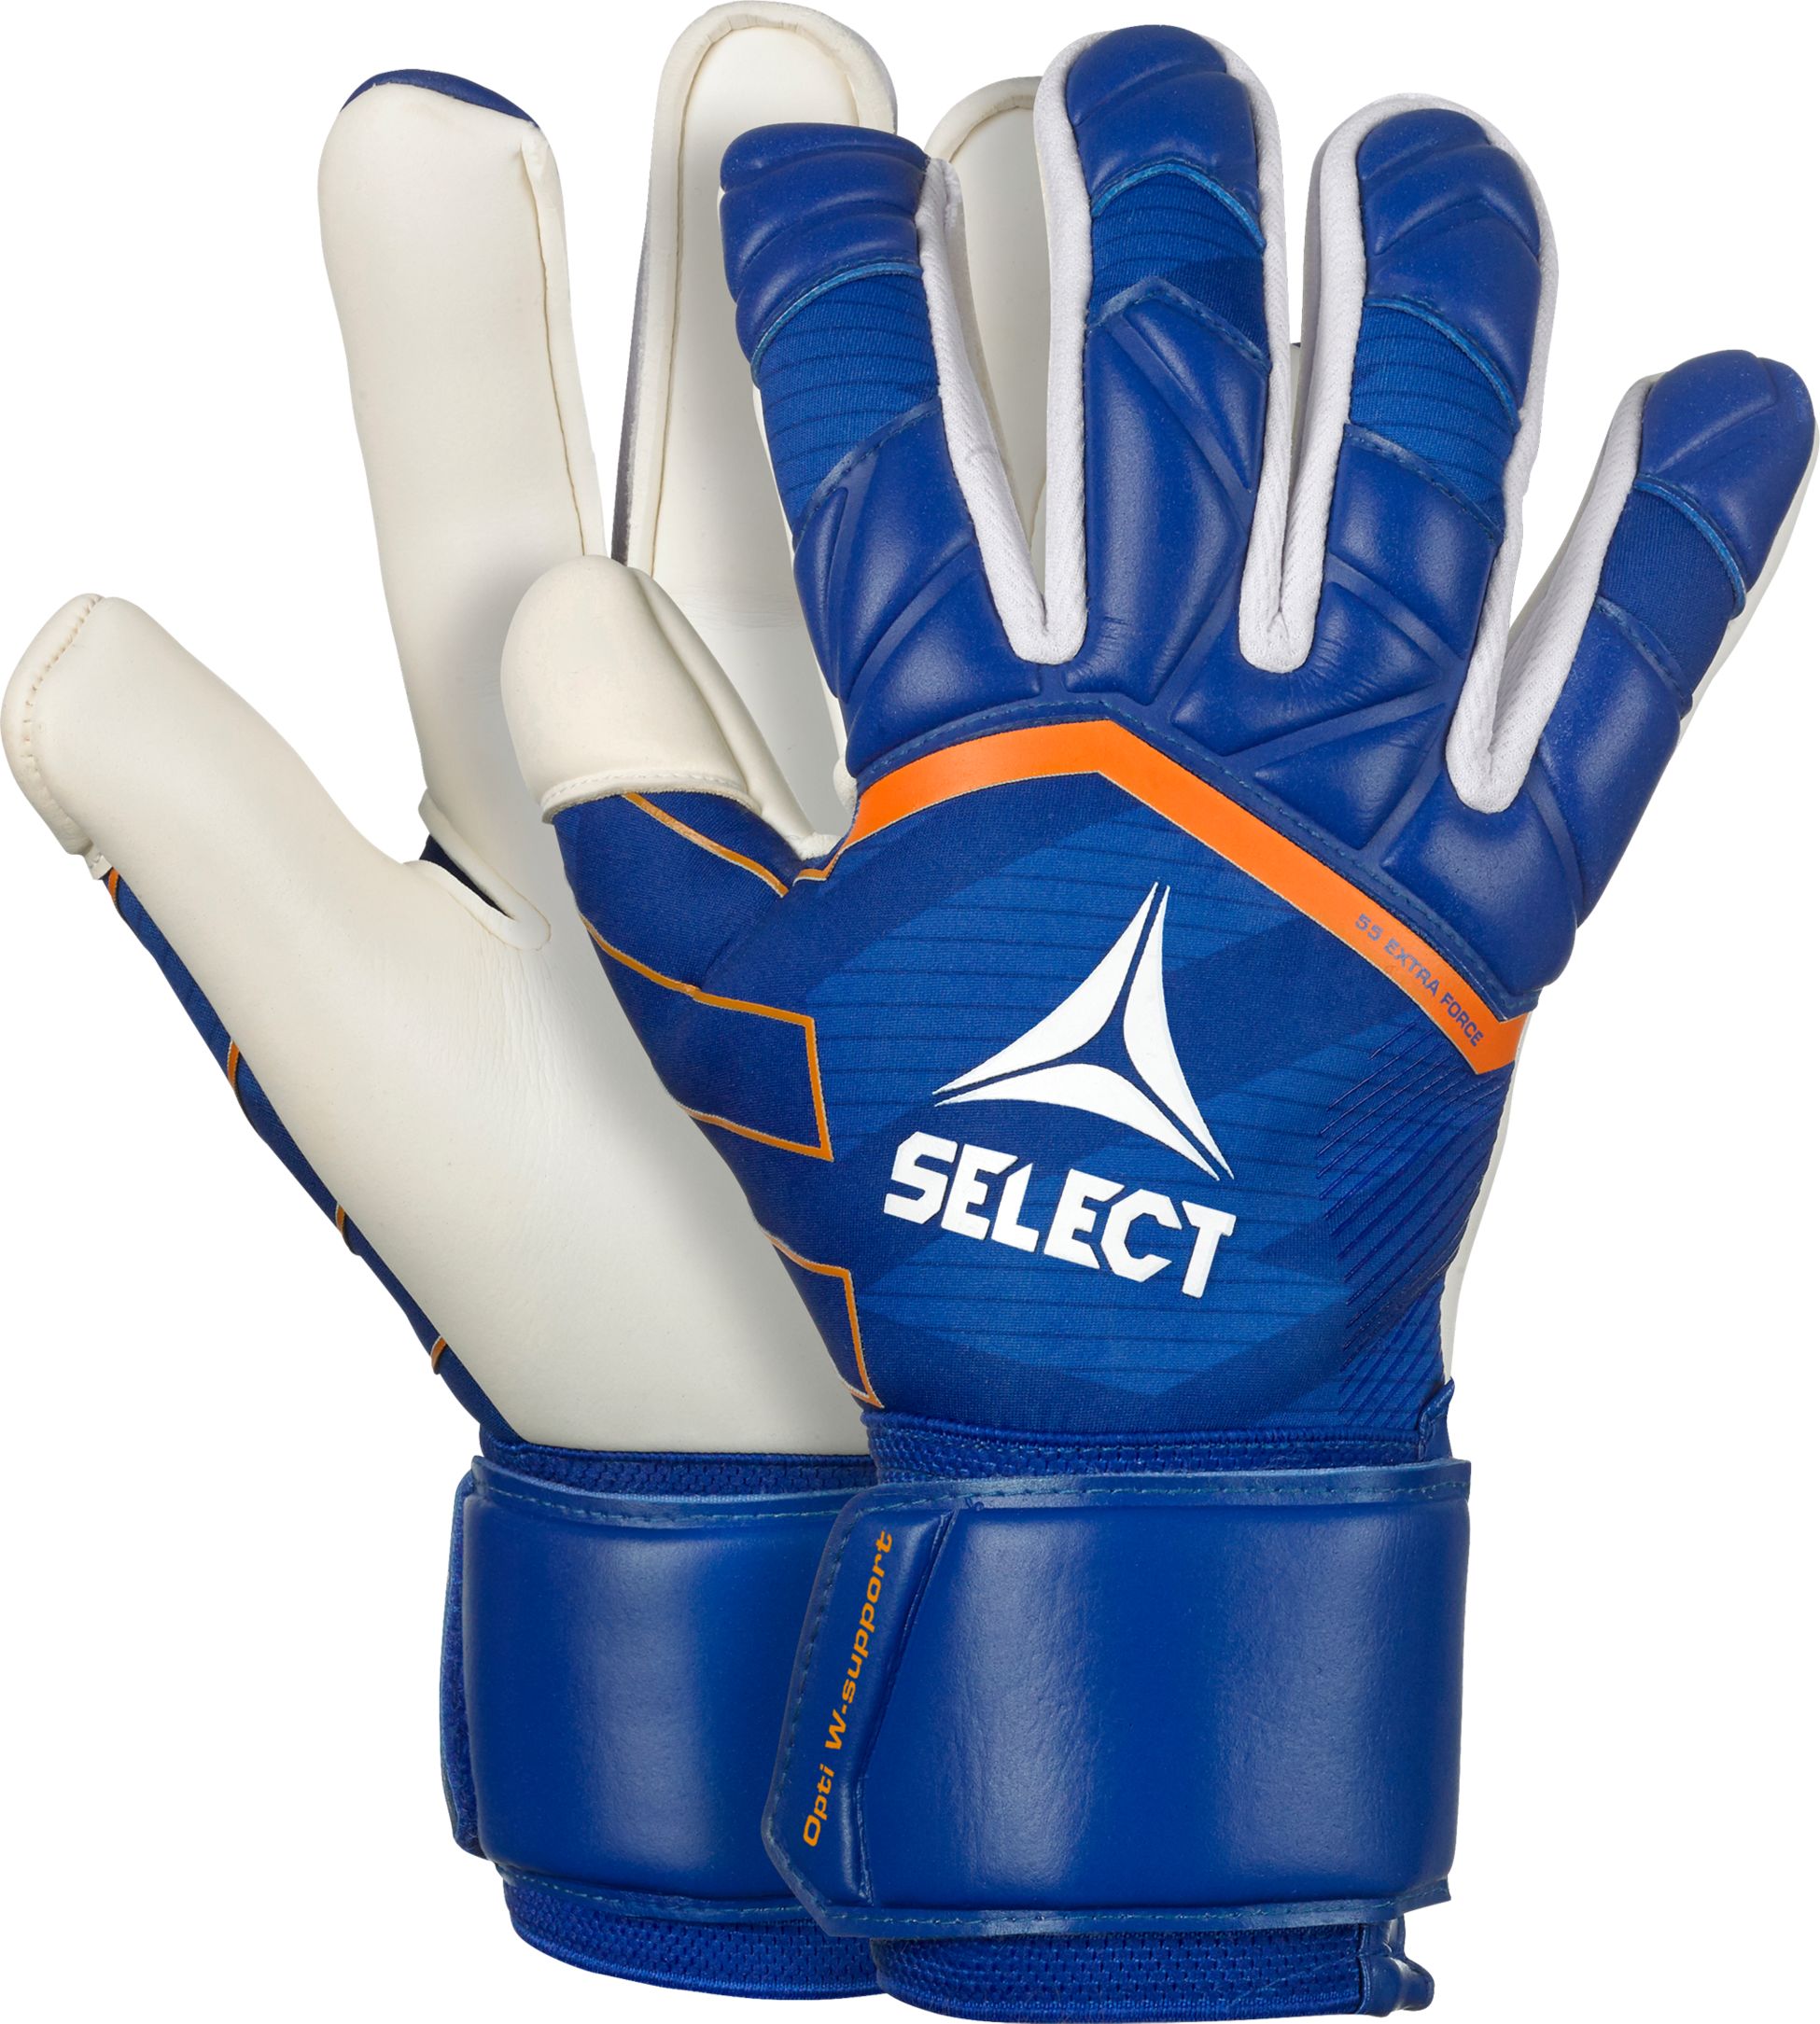 SELECT, 55 EXTRA FORCE GLOVE